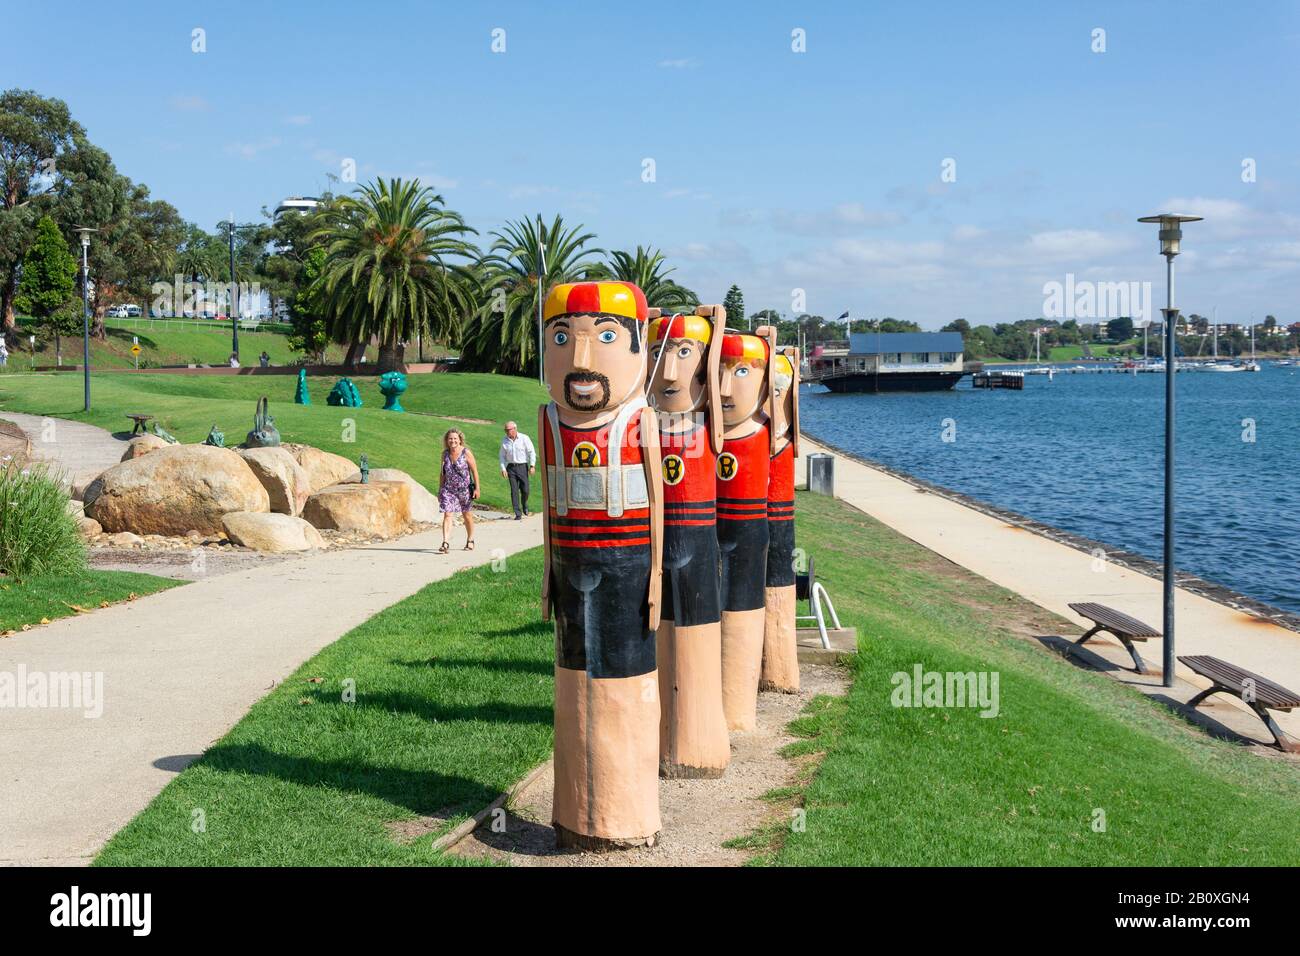 Lifesaver character bollards on harbour foreshore, Geelong, Grant County, Victoria, Australia Stock Photo